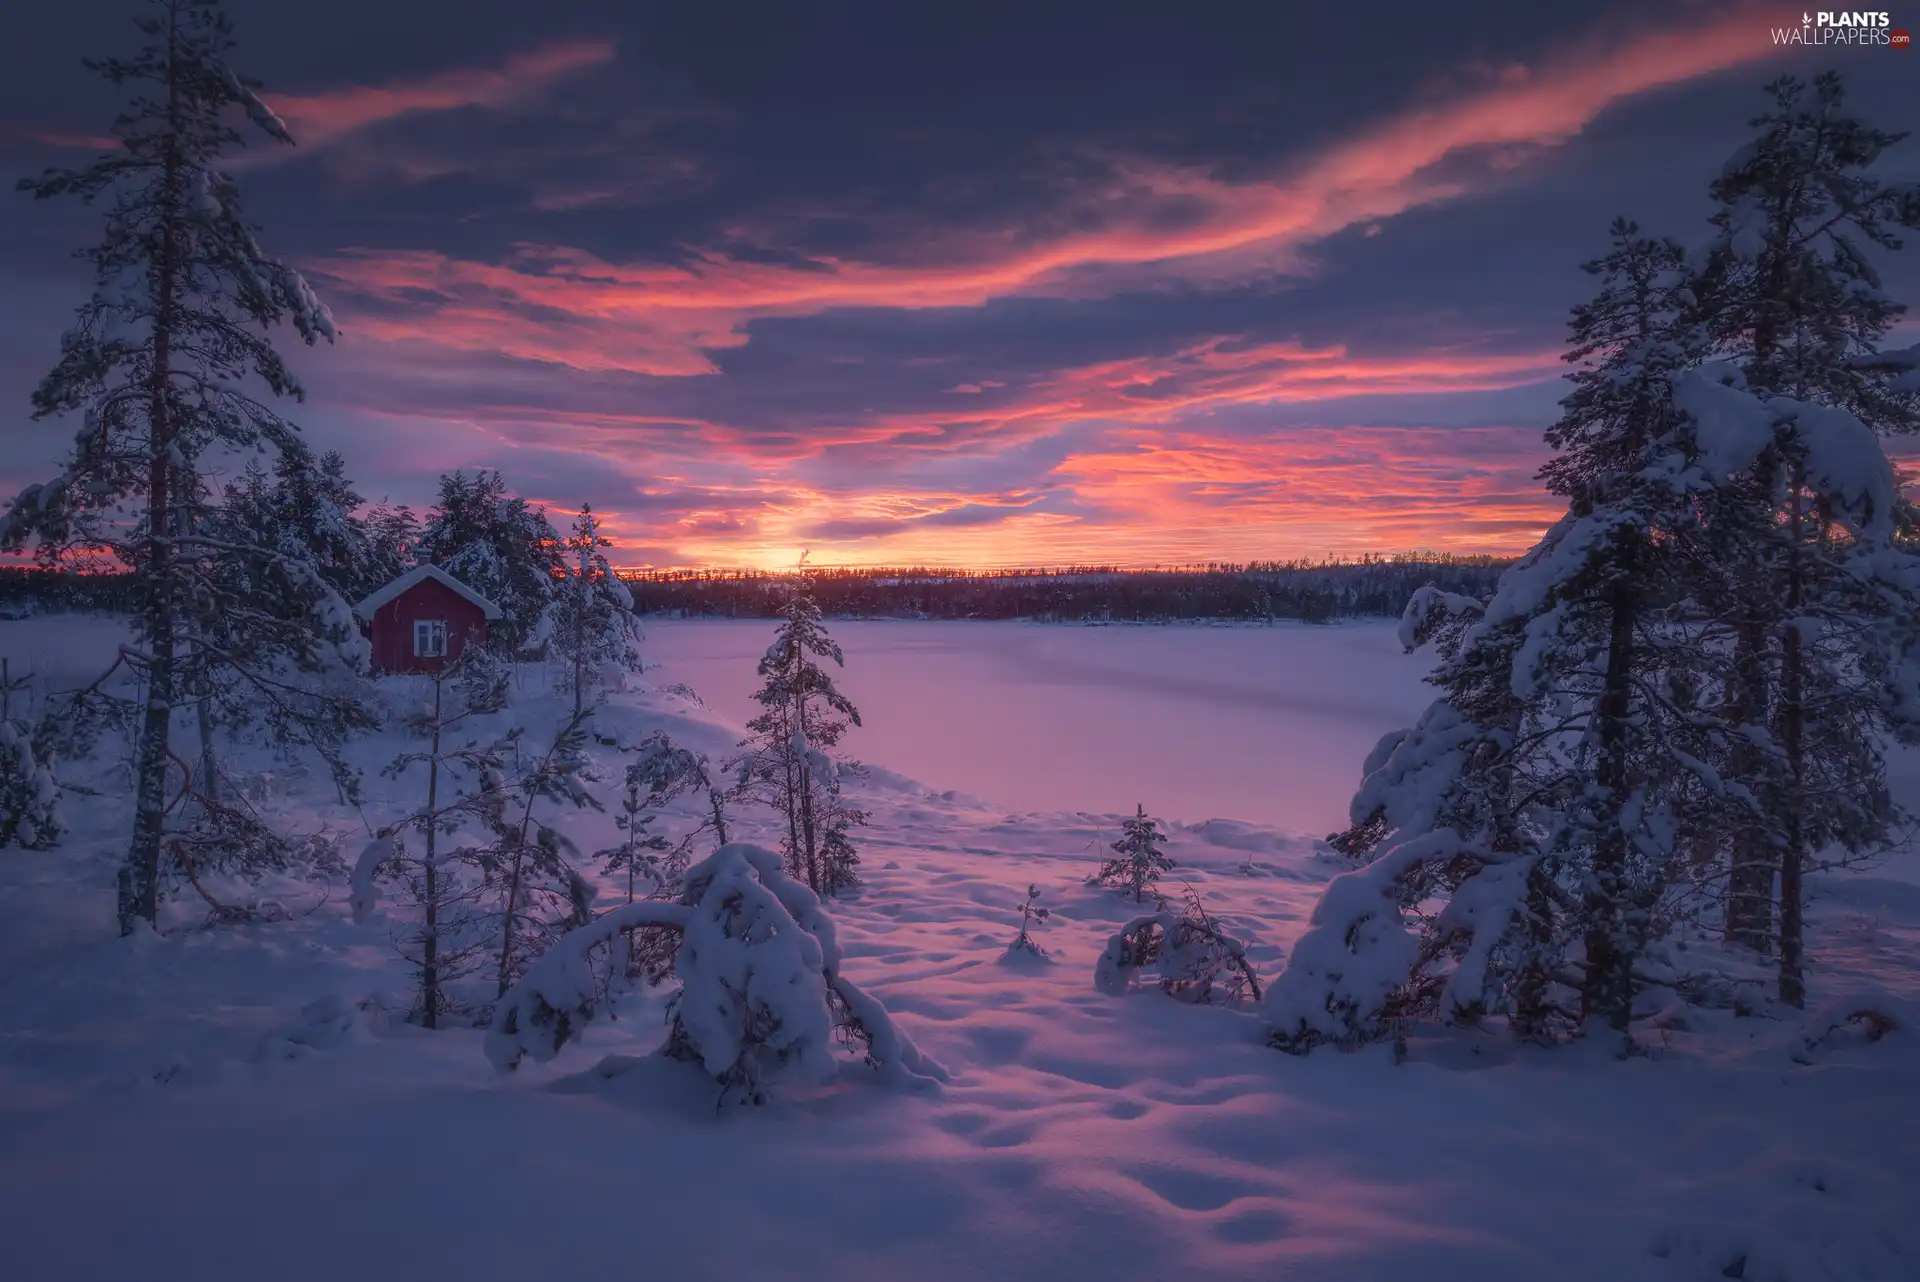 clouds, trees, house, Ringerike, snowy, winter, viewes, Norway, Great Sunsets, lake